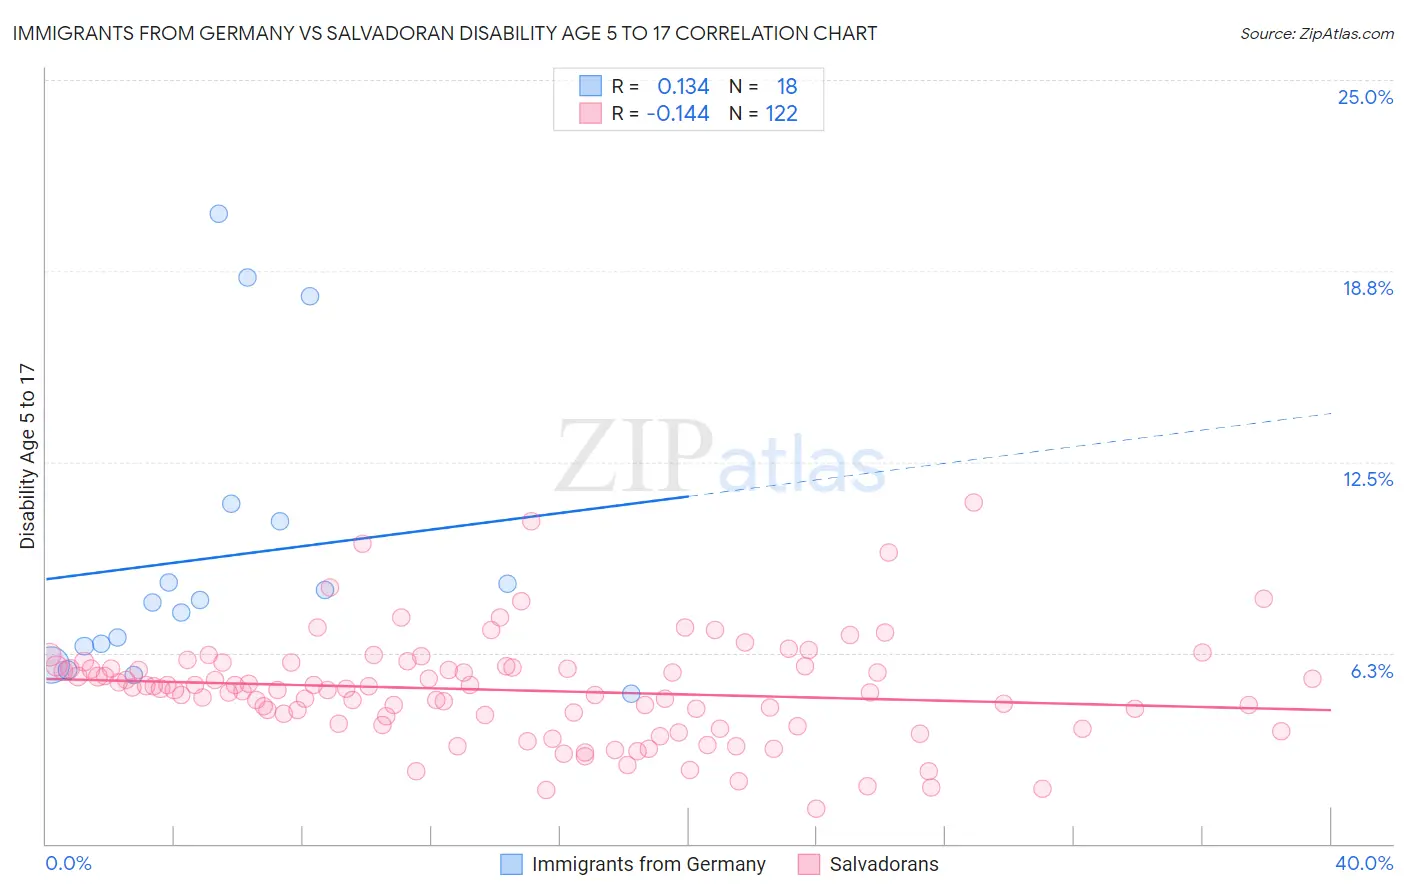 Immigrants from Germany vs Salvadoran Disability Age 5 to 17